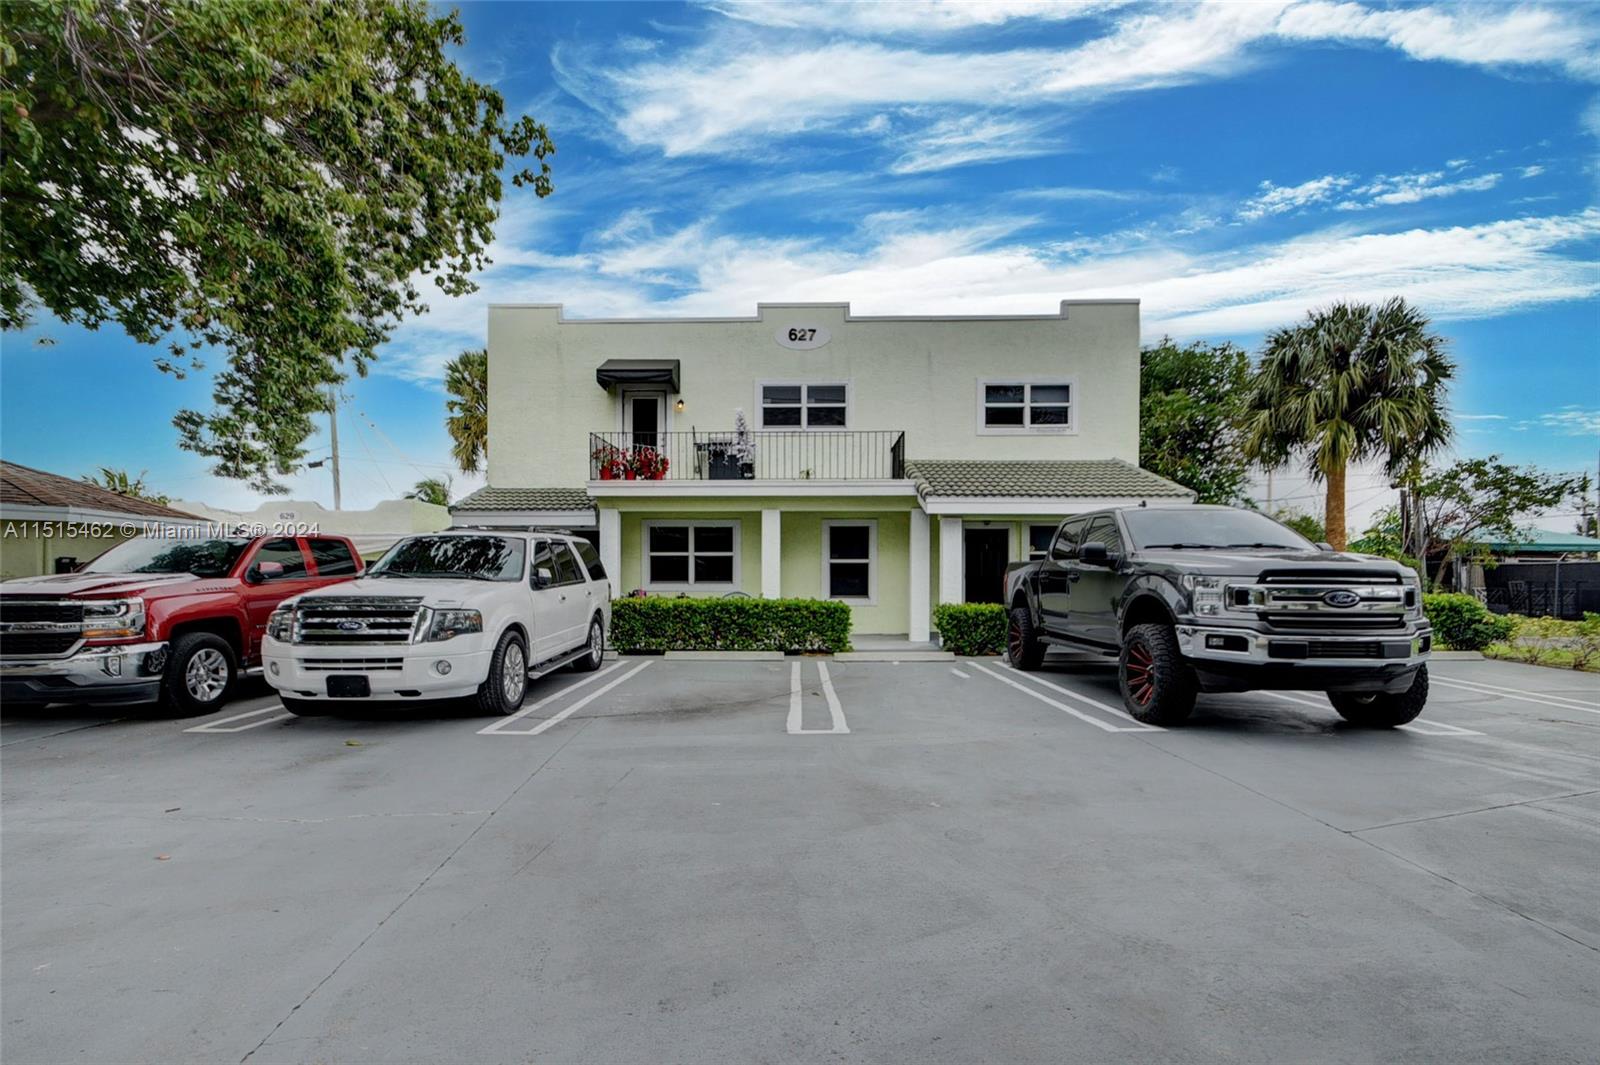 Rental Property at 627 Bunker Rd Rd, West Palm Beach, Palm Beach County, Florida -  - $1,399,900 MO.